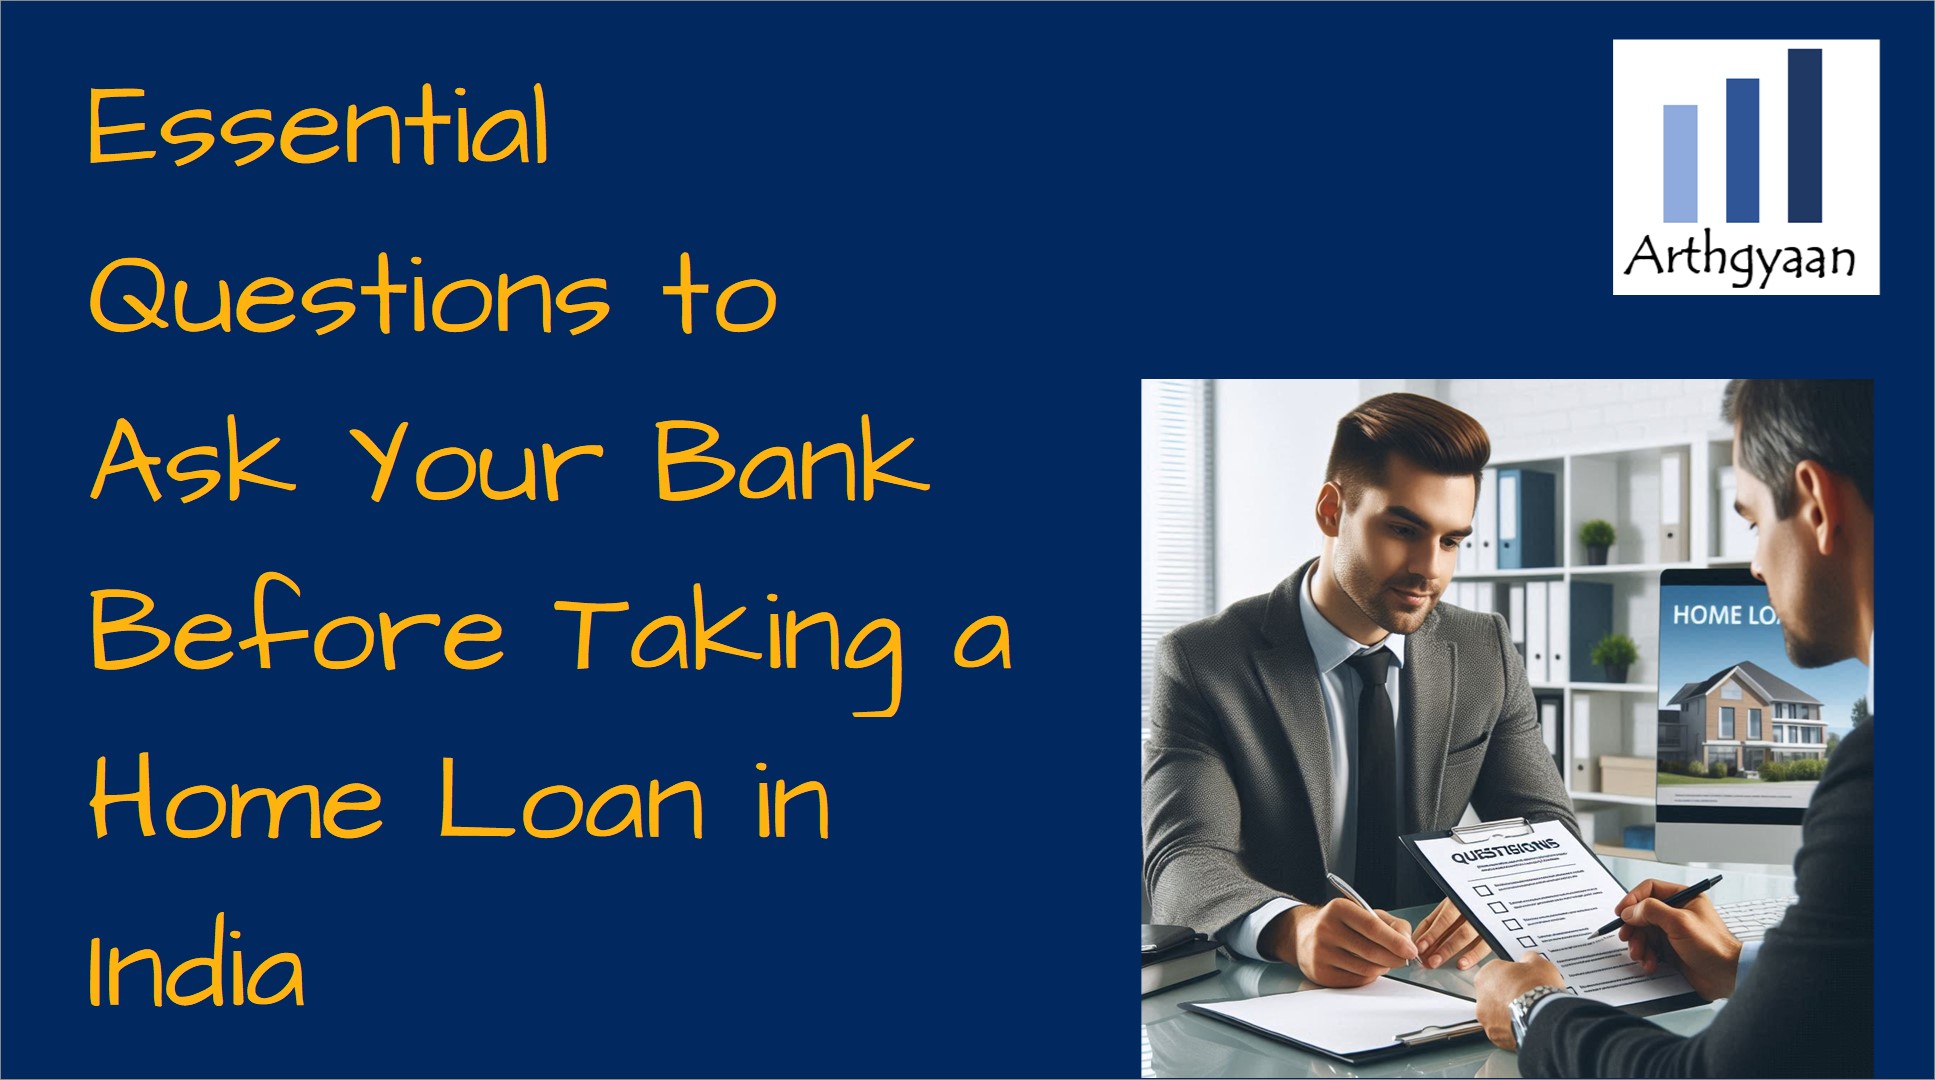 Essential Questions to Ask Your Bank Before Taking a Home Loan in India